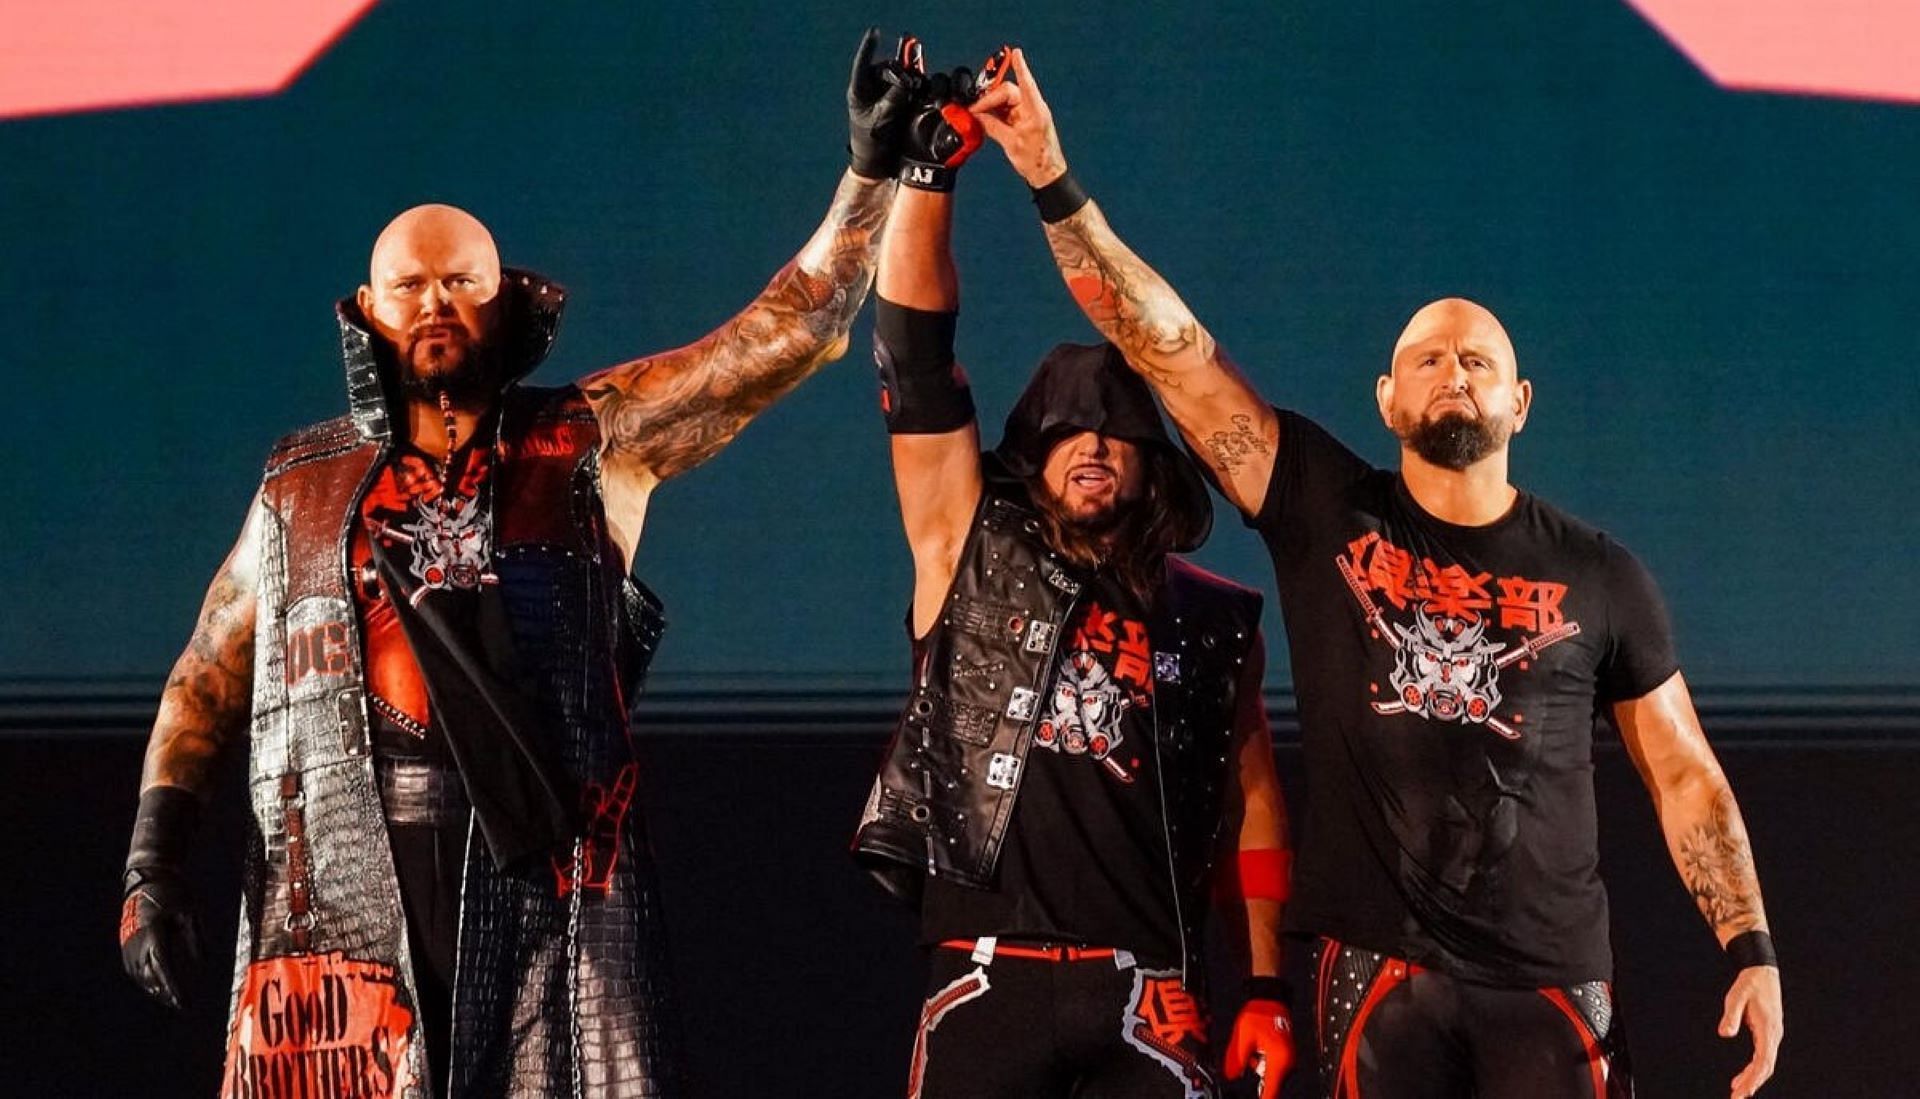 Lately, Gallows and Anderson have been at odds with Styles.